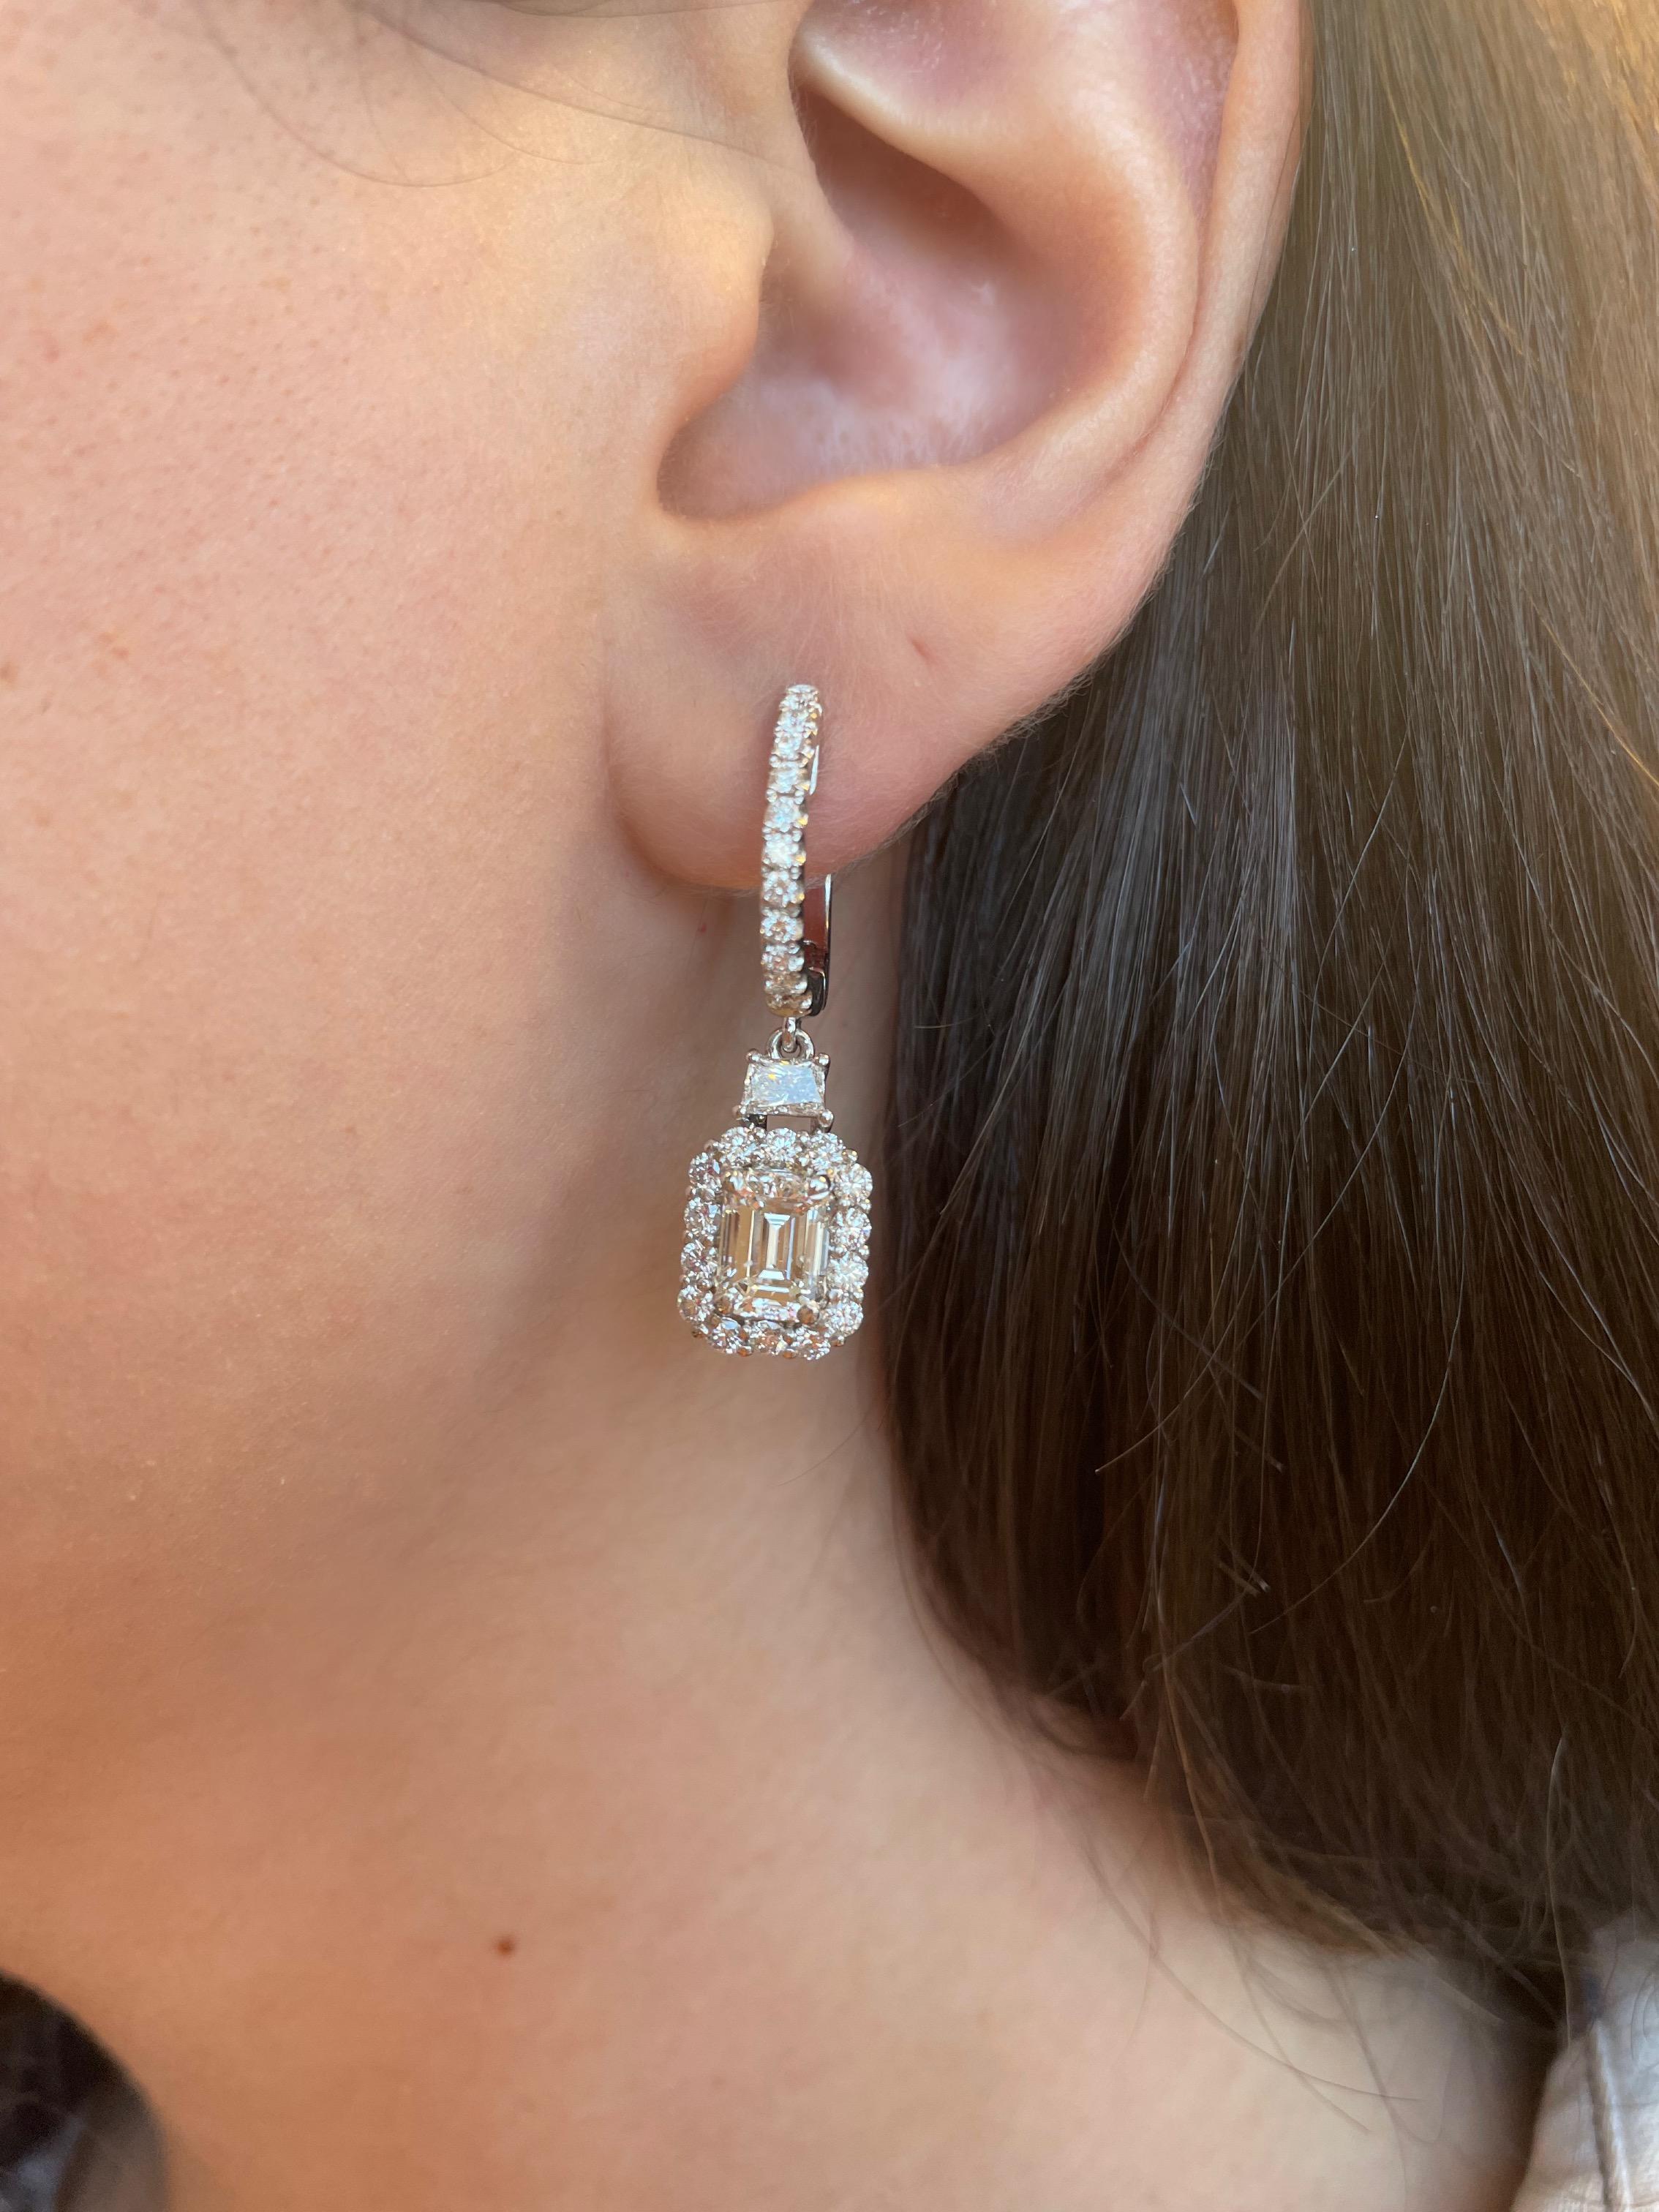 Stunning emerald cut diamond with trapezoid diamonds and halo earrings, GIA certified. High jewelry by Alexander Beverly Hills. 
4.03 carats total diamond weight. 
2 emerald cut diamonds, 2.37 carats. Both G color and VS1 clarity GIA certified.